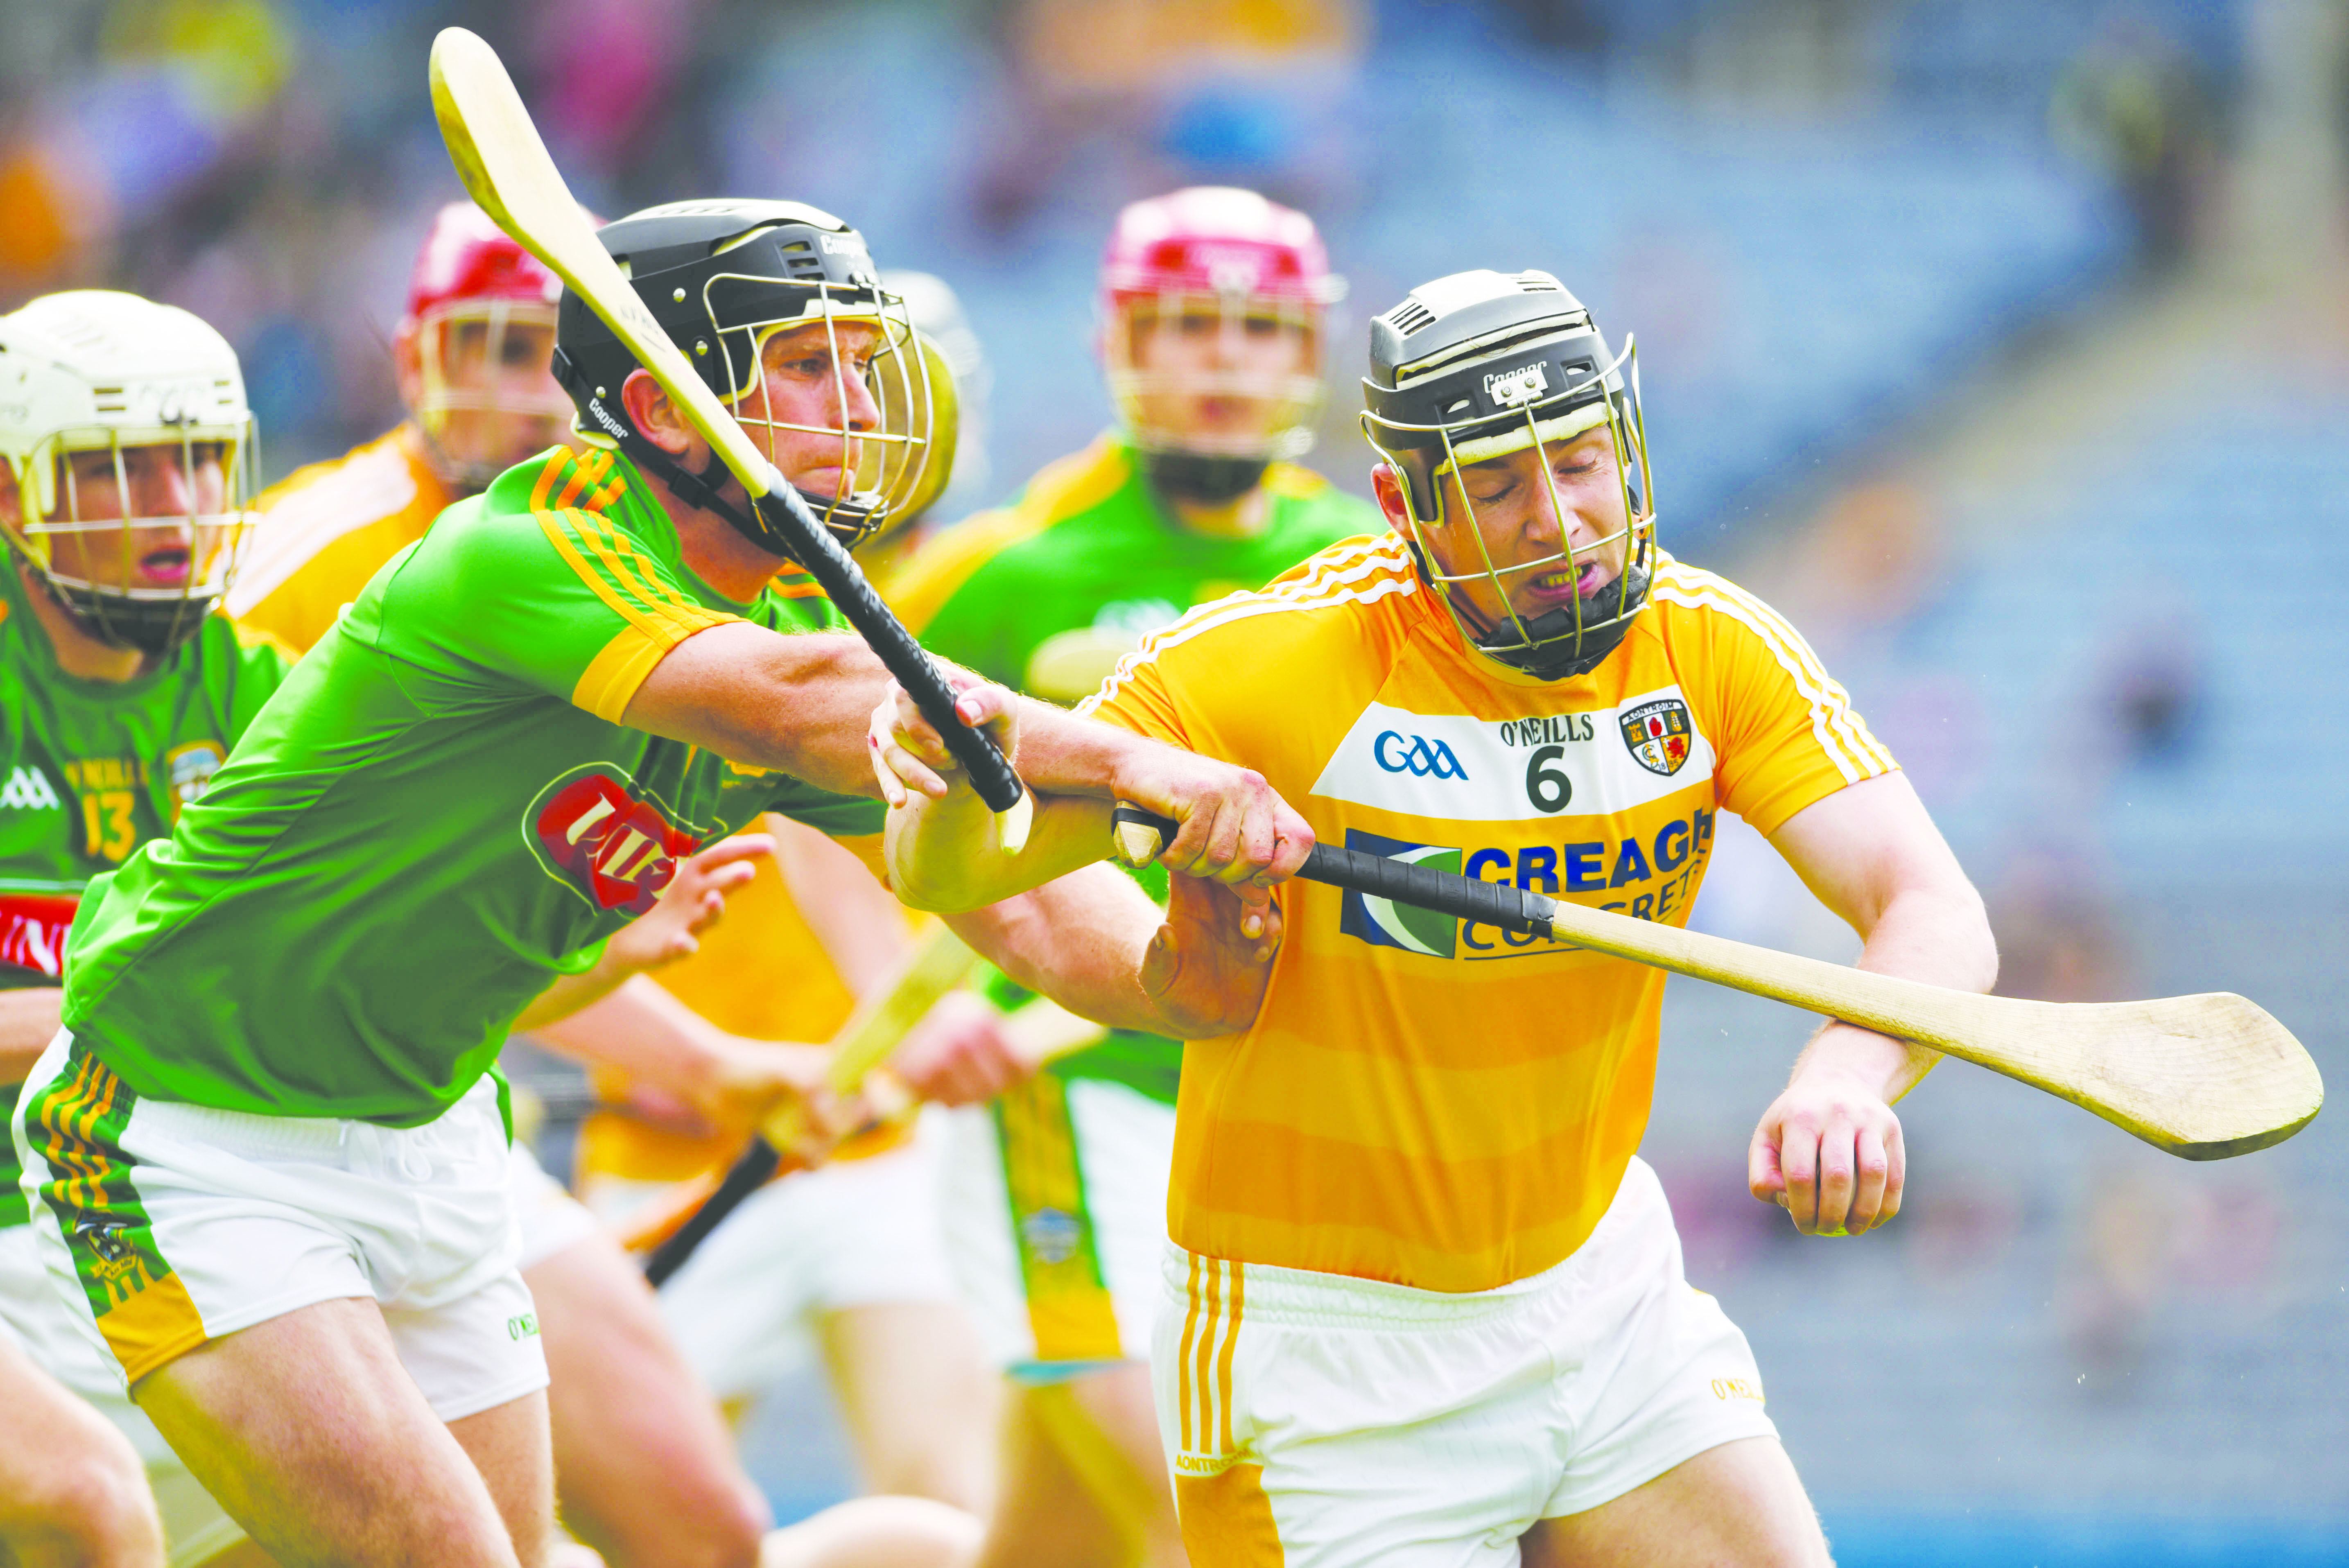 Antrim\'s Neal McAuley holds off the challenge of Meath’s Joey Keena during last Saturday’s Christy Ring Cup final in Croke Park. The GAA’s Central Competitions Control Committee (CCCC) has ordered the game to be replayed after a score-keeping error resulted in Meath collecting the cup despite the game ending in a draw